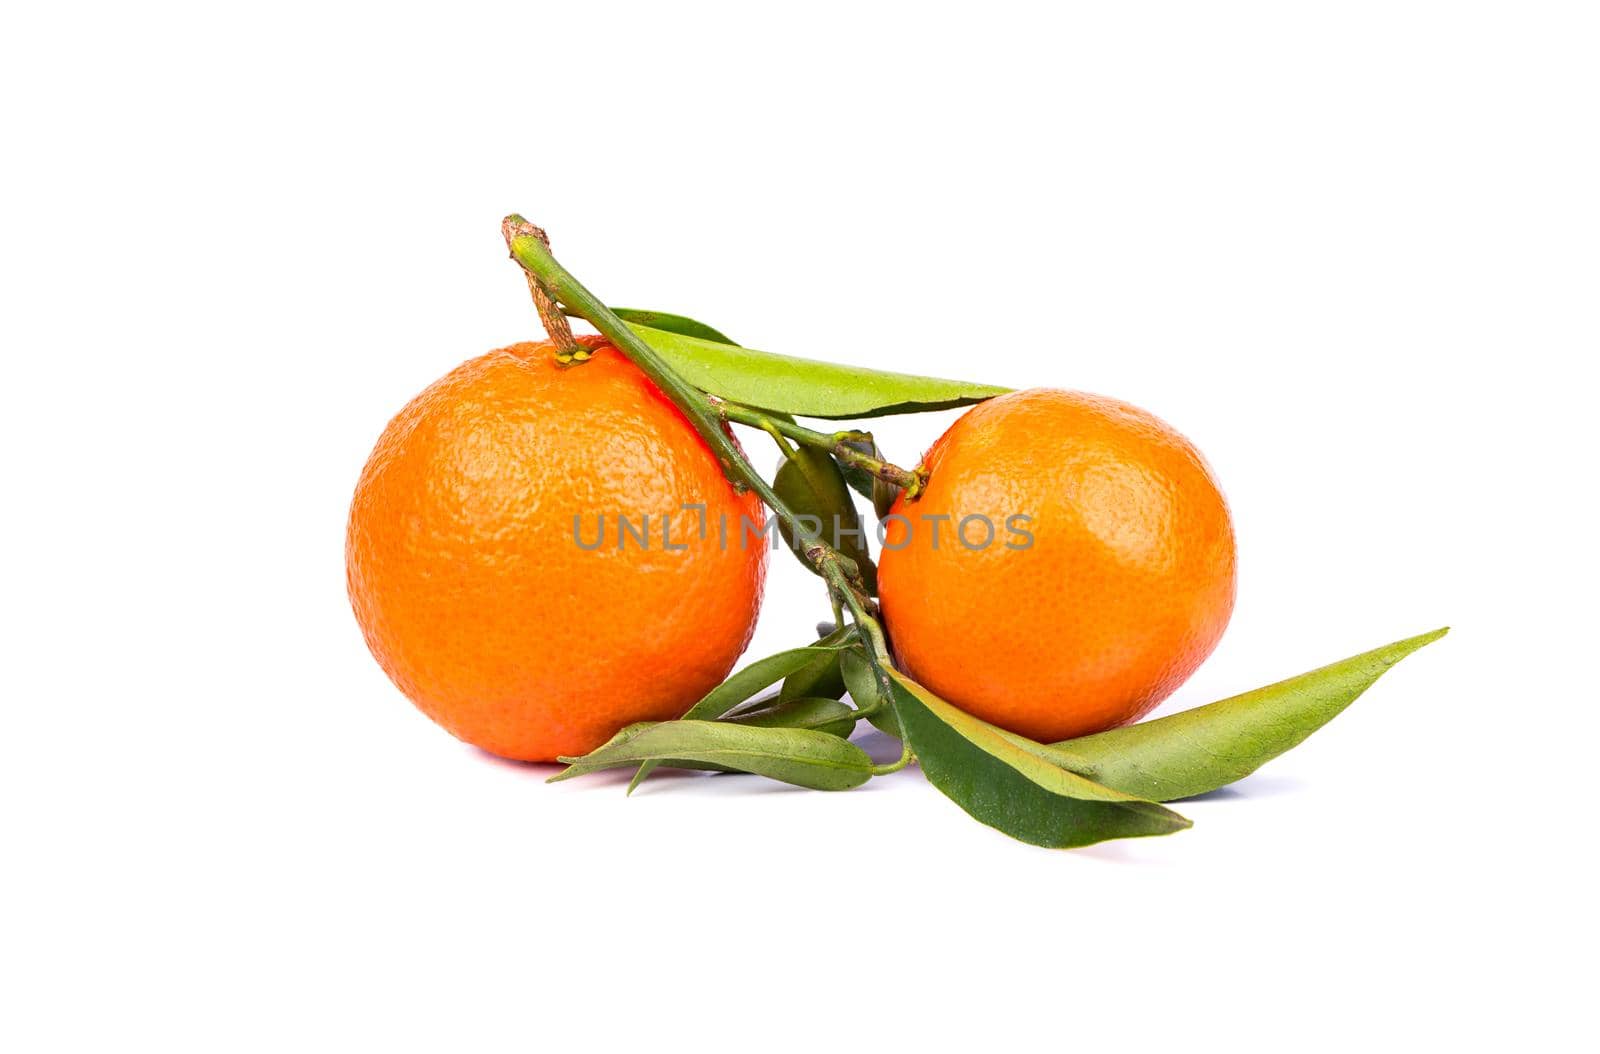 Small branch with fresh fruits two tangerines and leaf on a white background